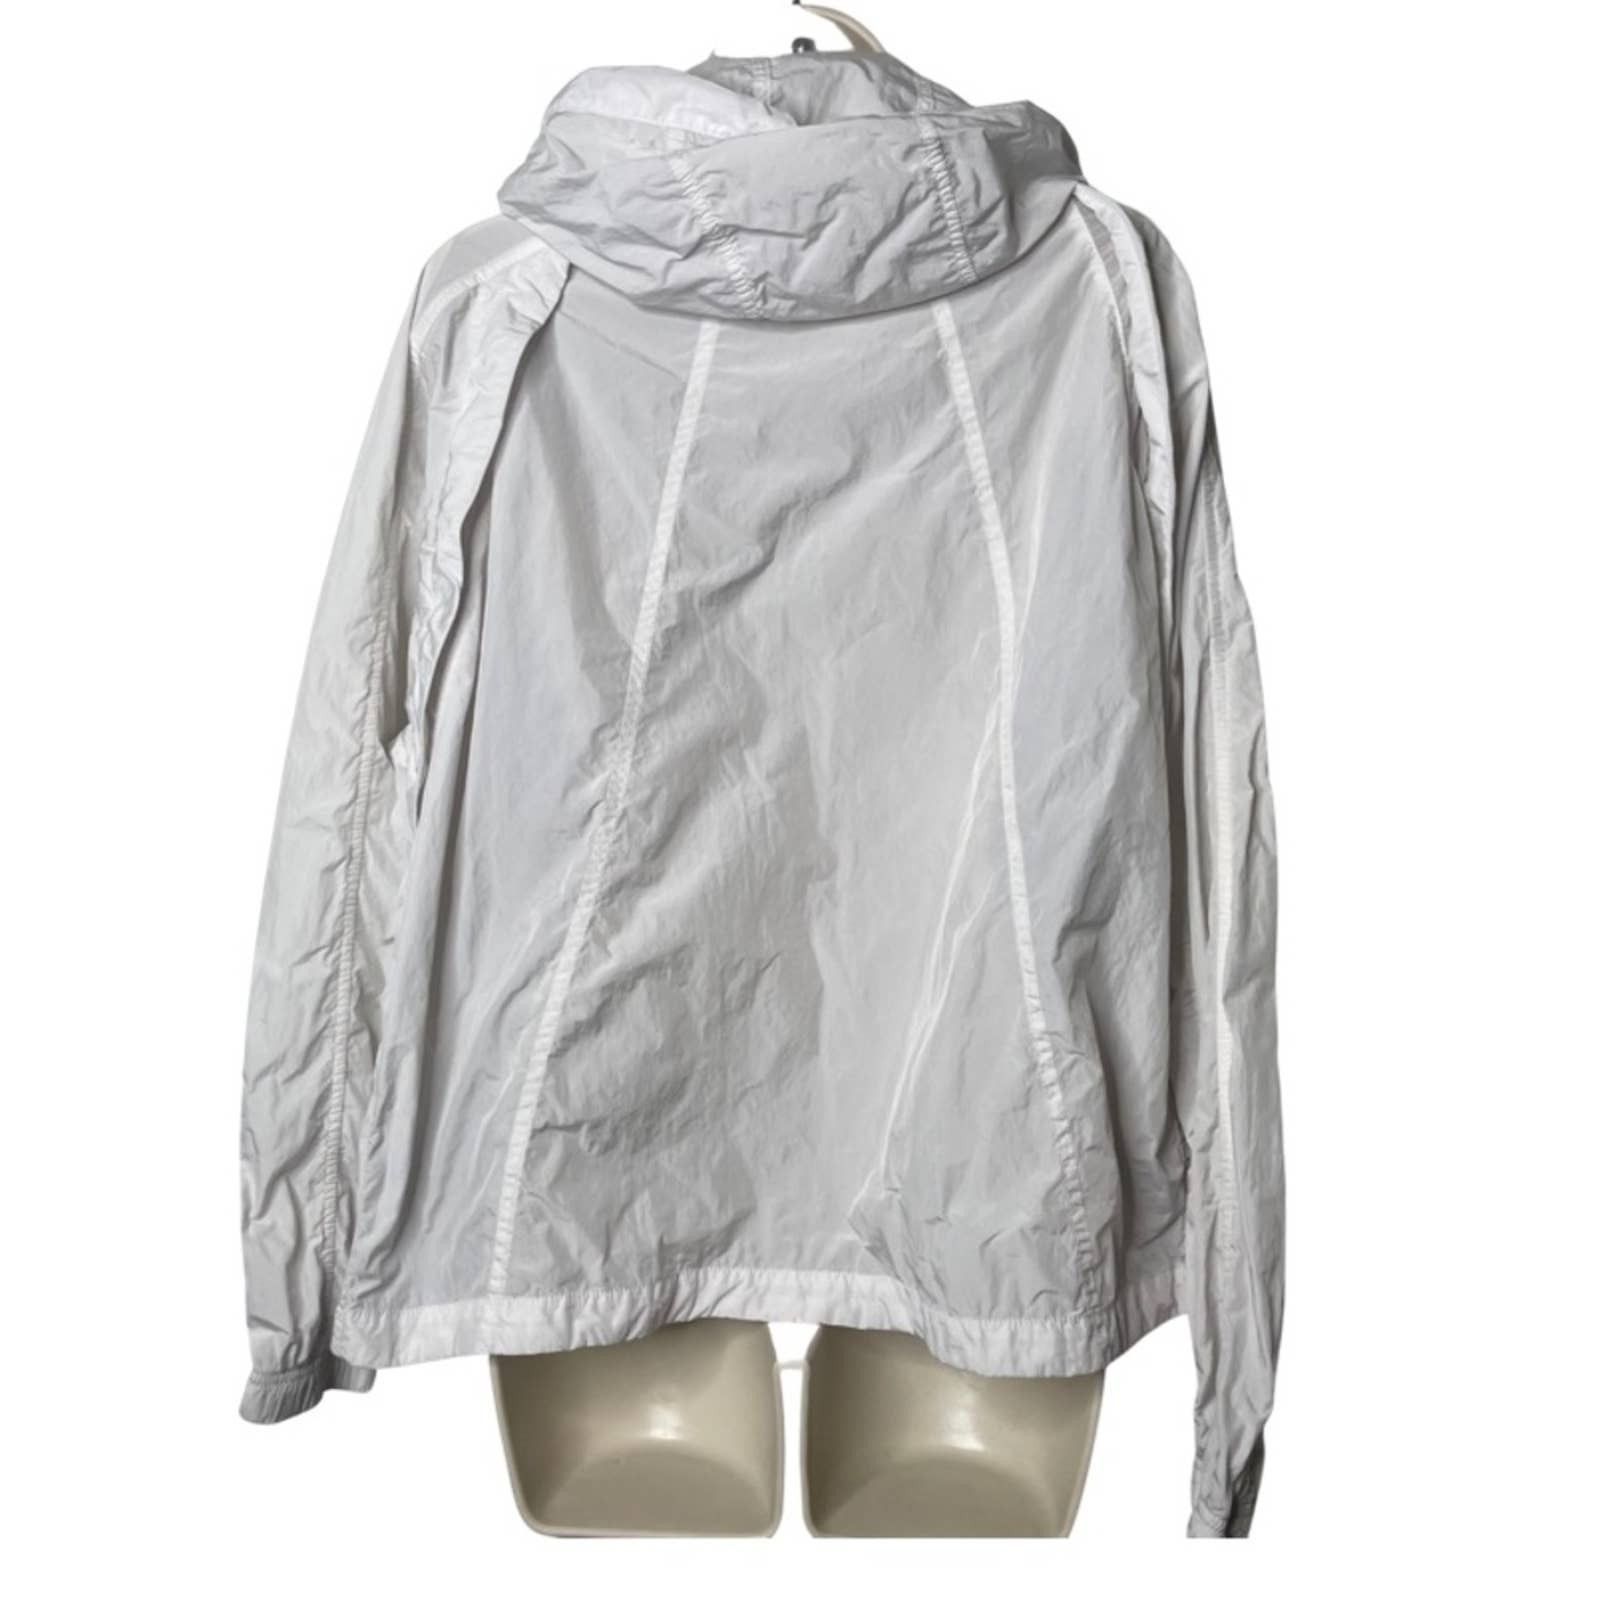 Other Athleta Expedition Hike Shell Lightweight Mesh Jacket Size M / US 6-8 / IT 42-44 - 2 Preview